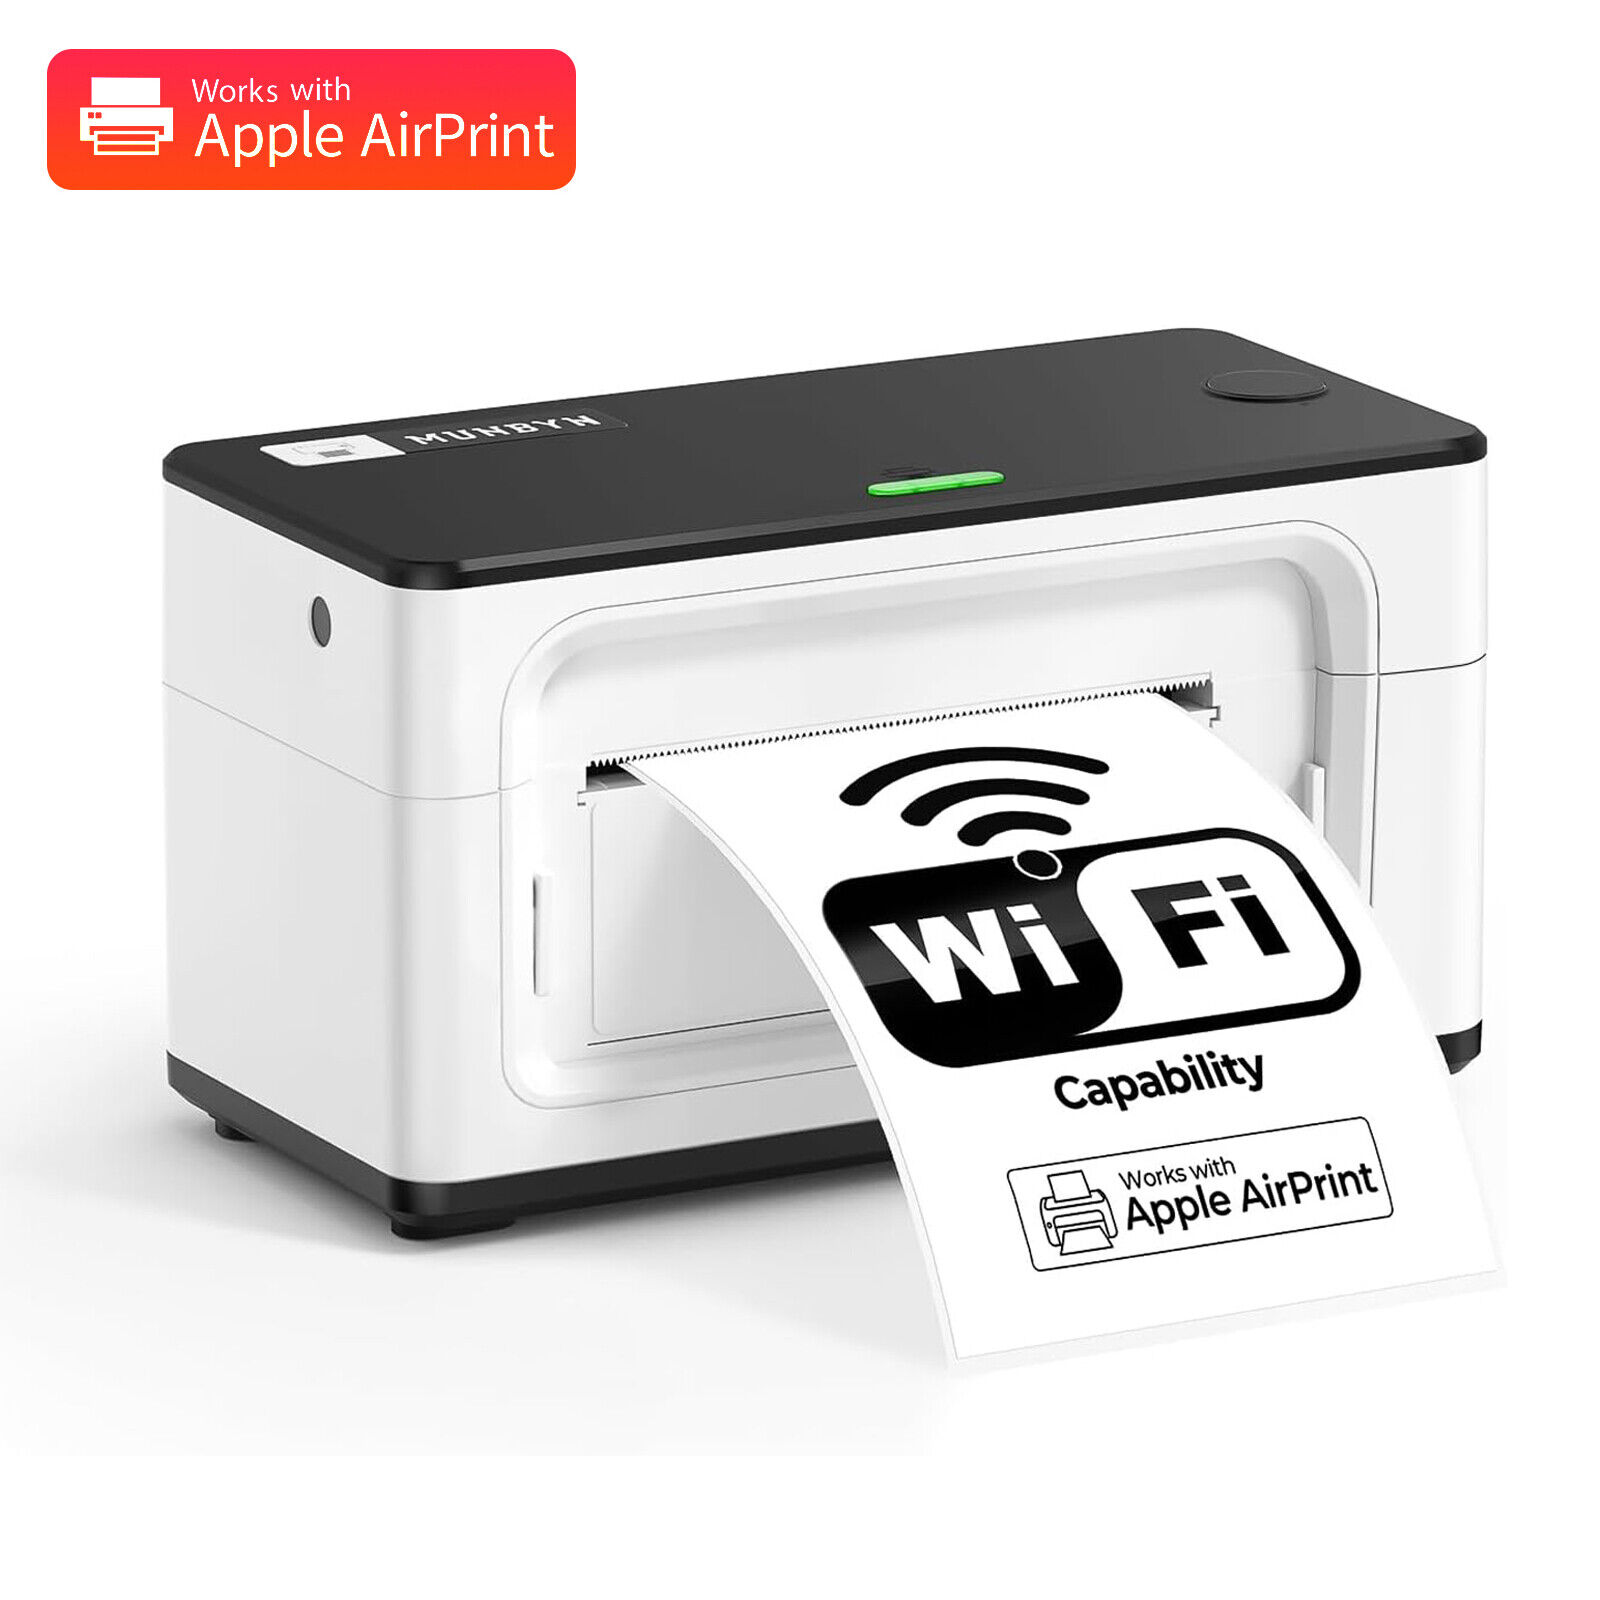 MUNBYN Wireless Label Printer Wi-Fi Thermal Printer for AirPrint iPhone macOS